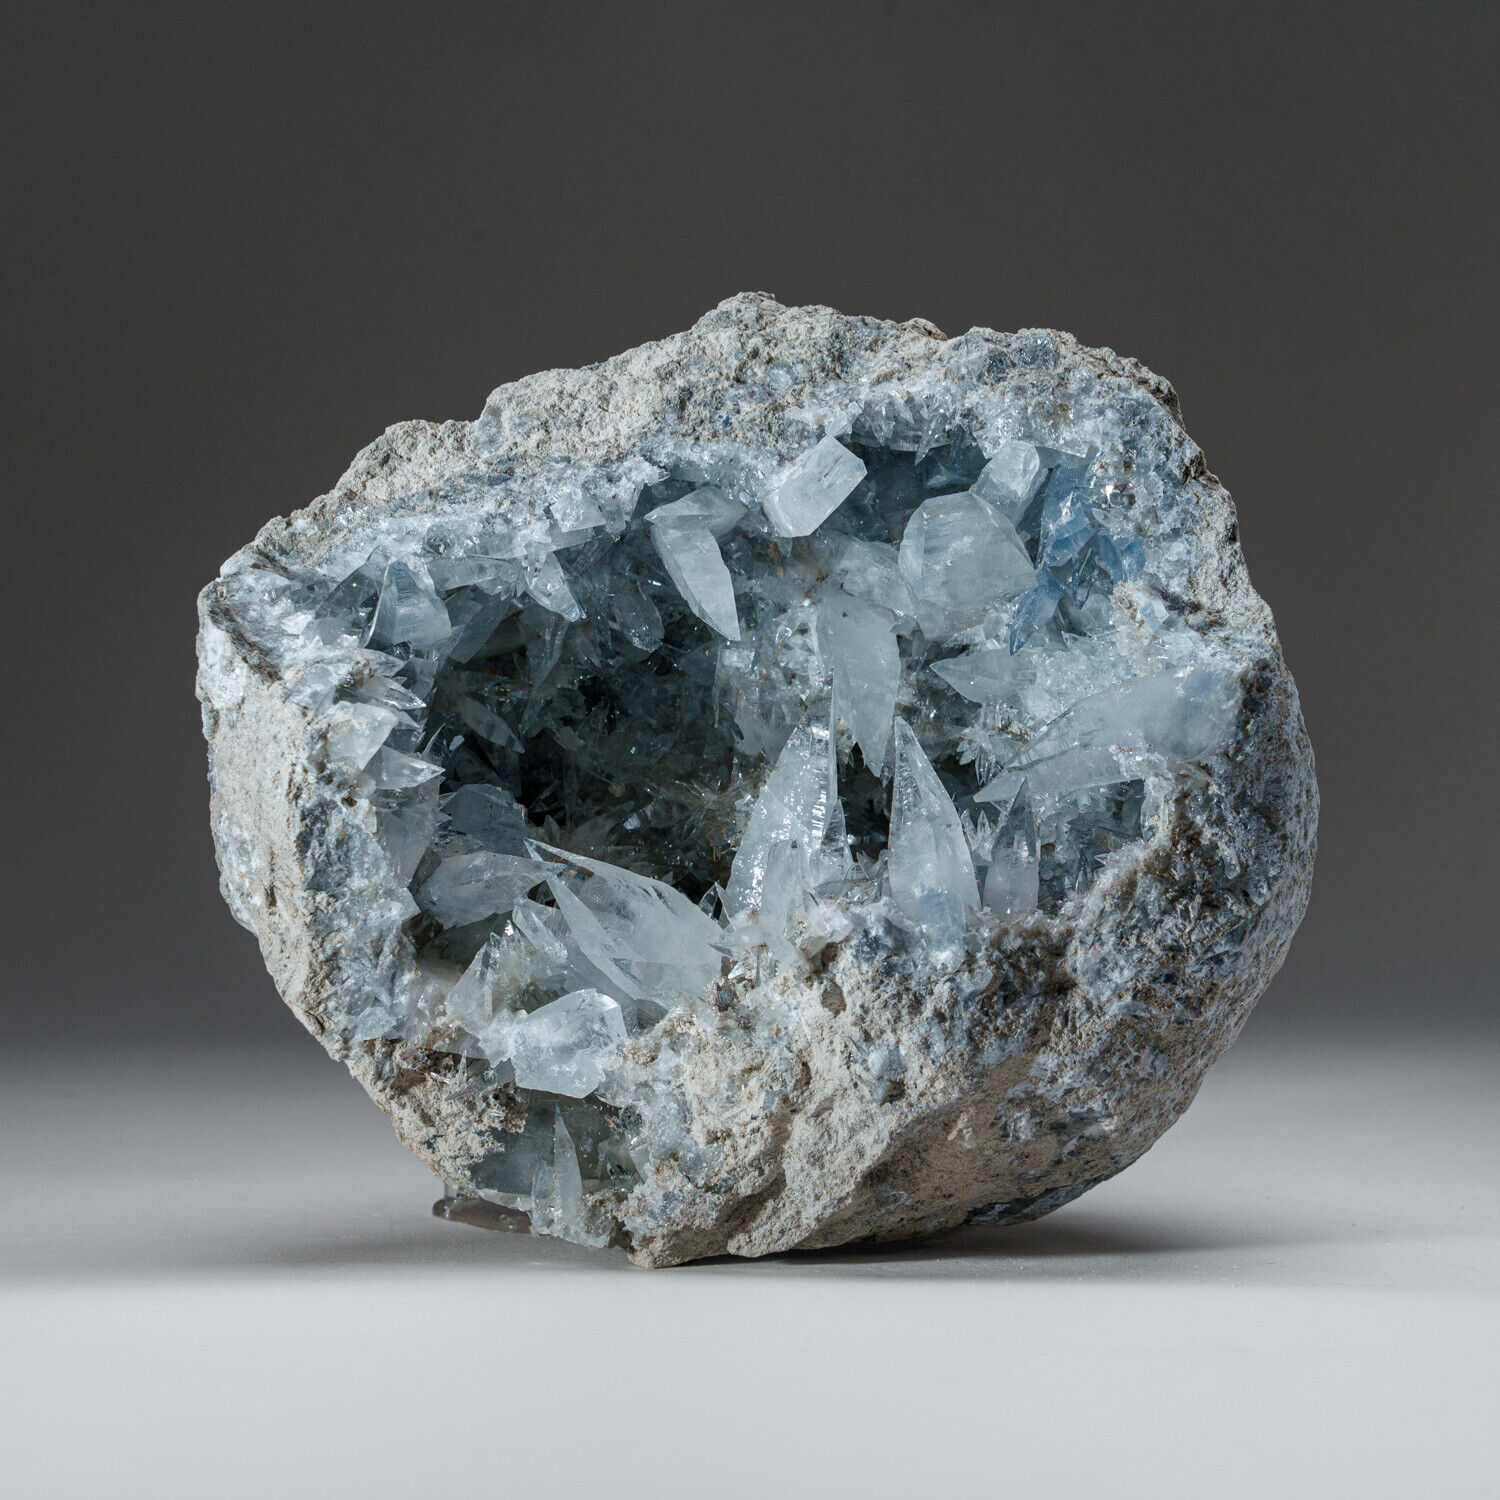 Blue Celestite Cluster Geode From Sankoany, Madagascar (13.5 lbs)